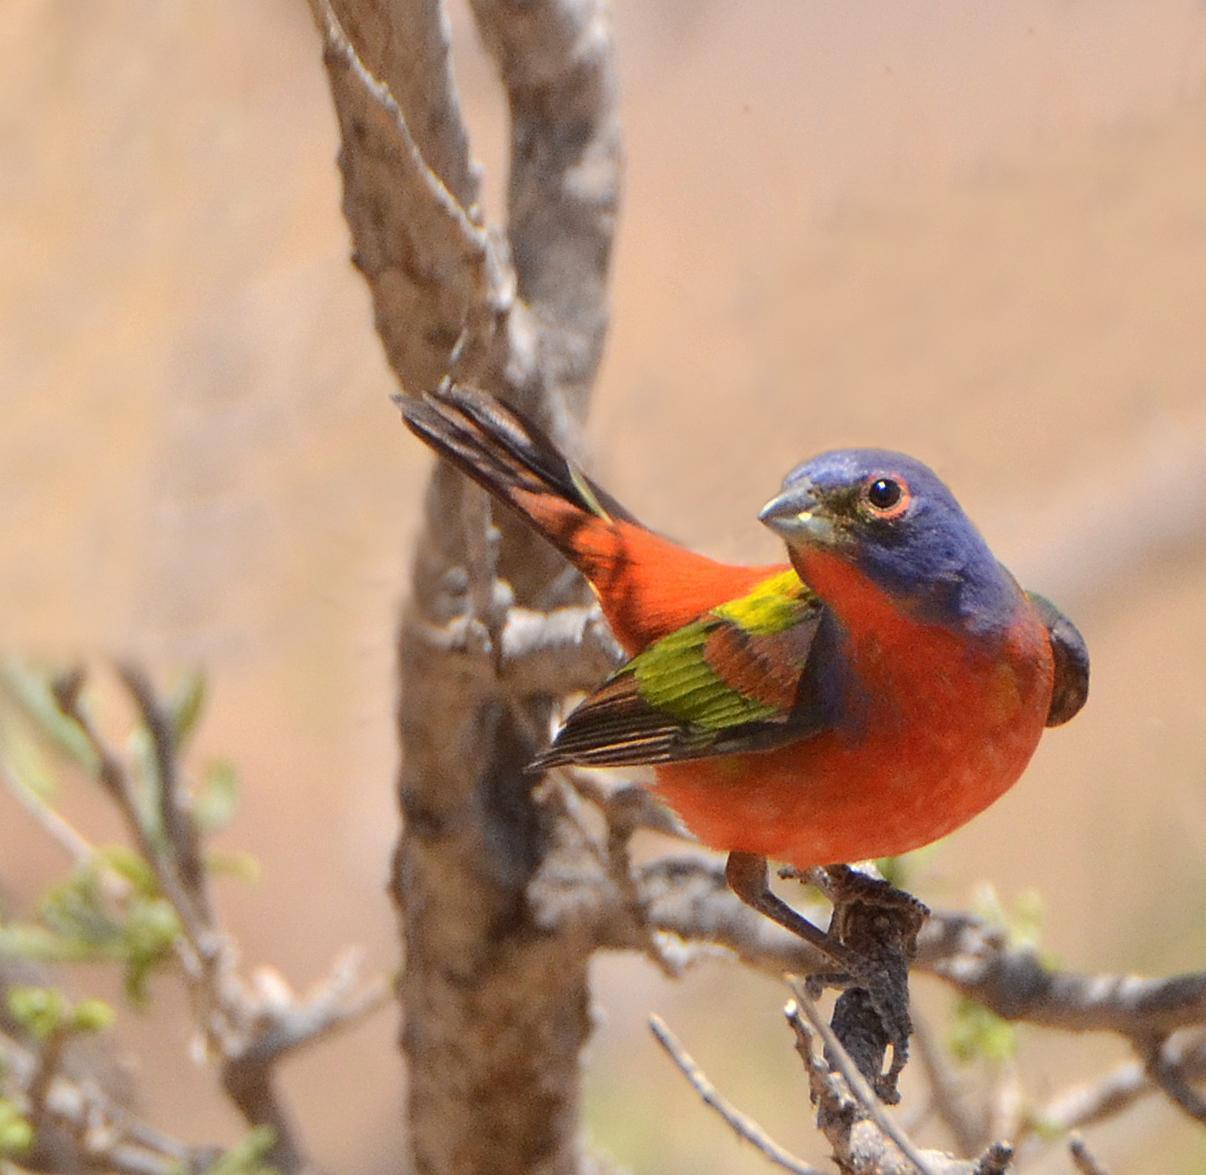 Painted Bunting Photo by Steven Mlodinow